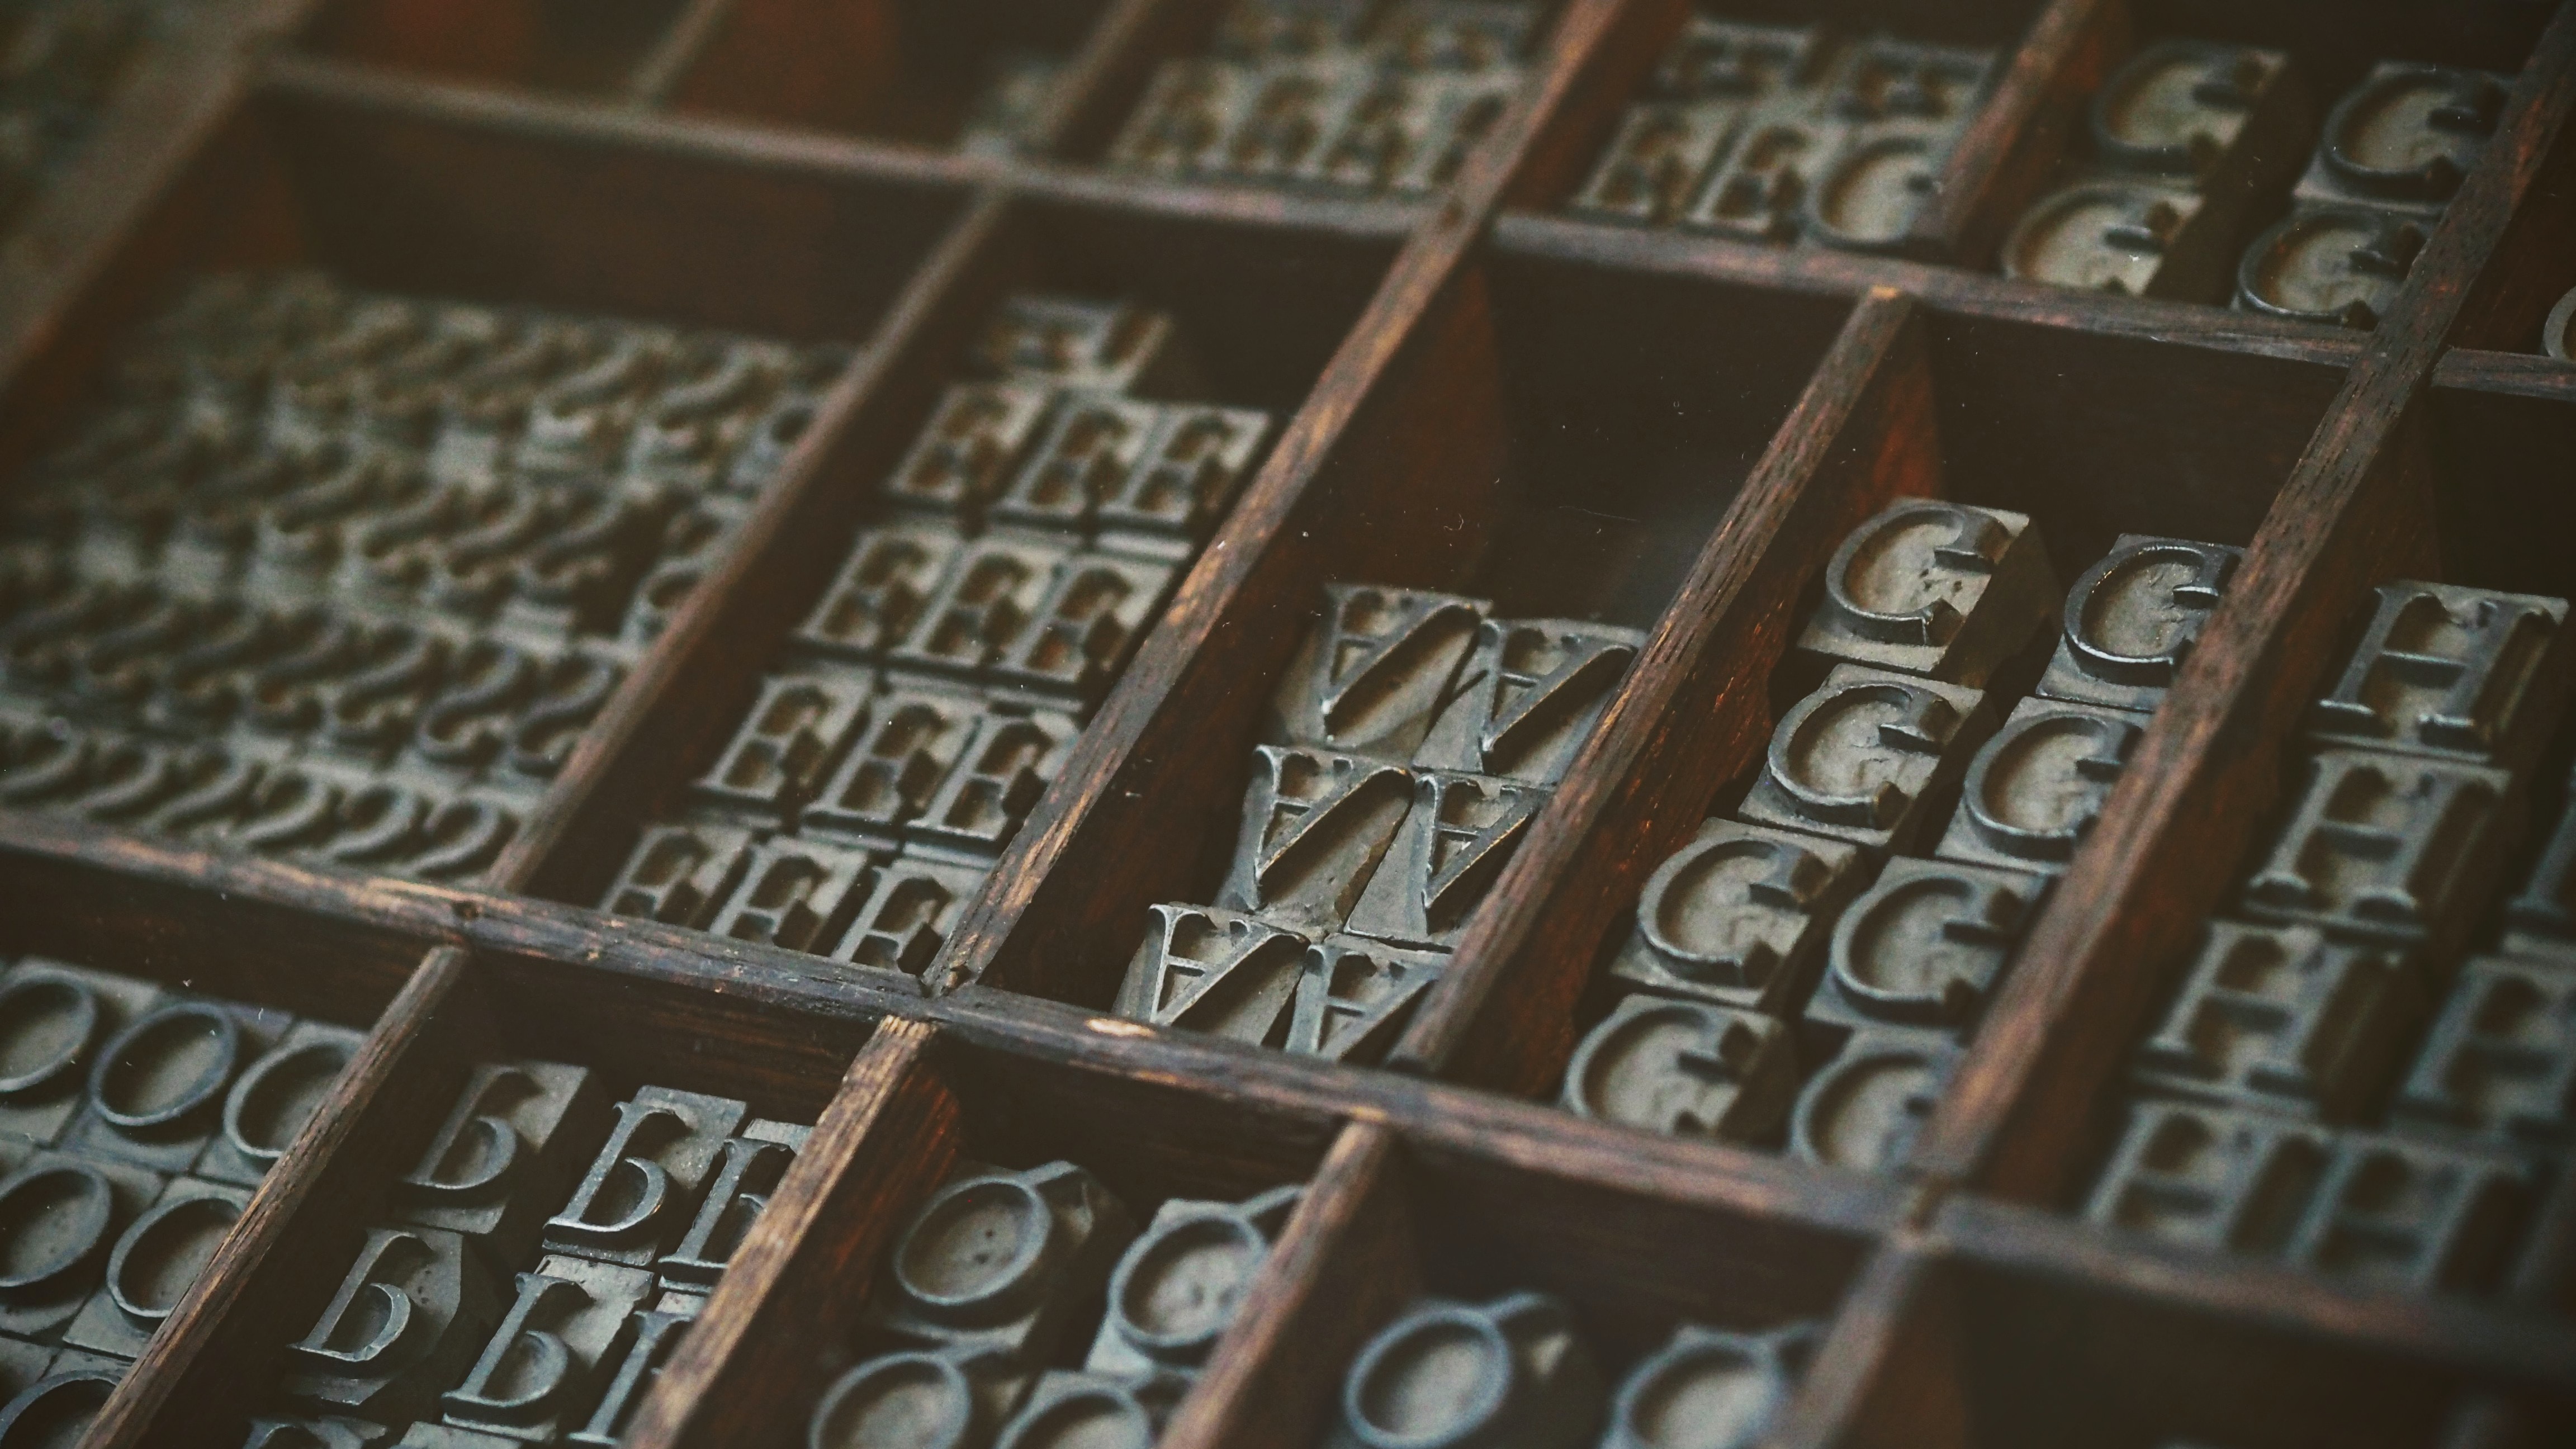 Multiple copies of movably type letters in a wooden frame